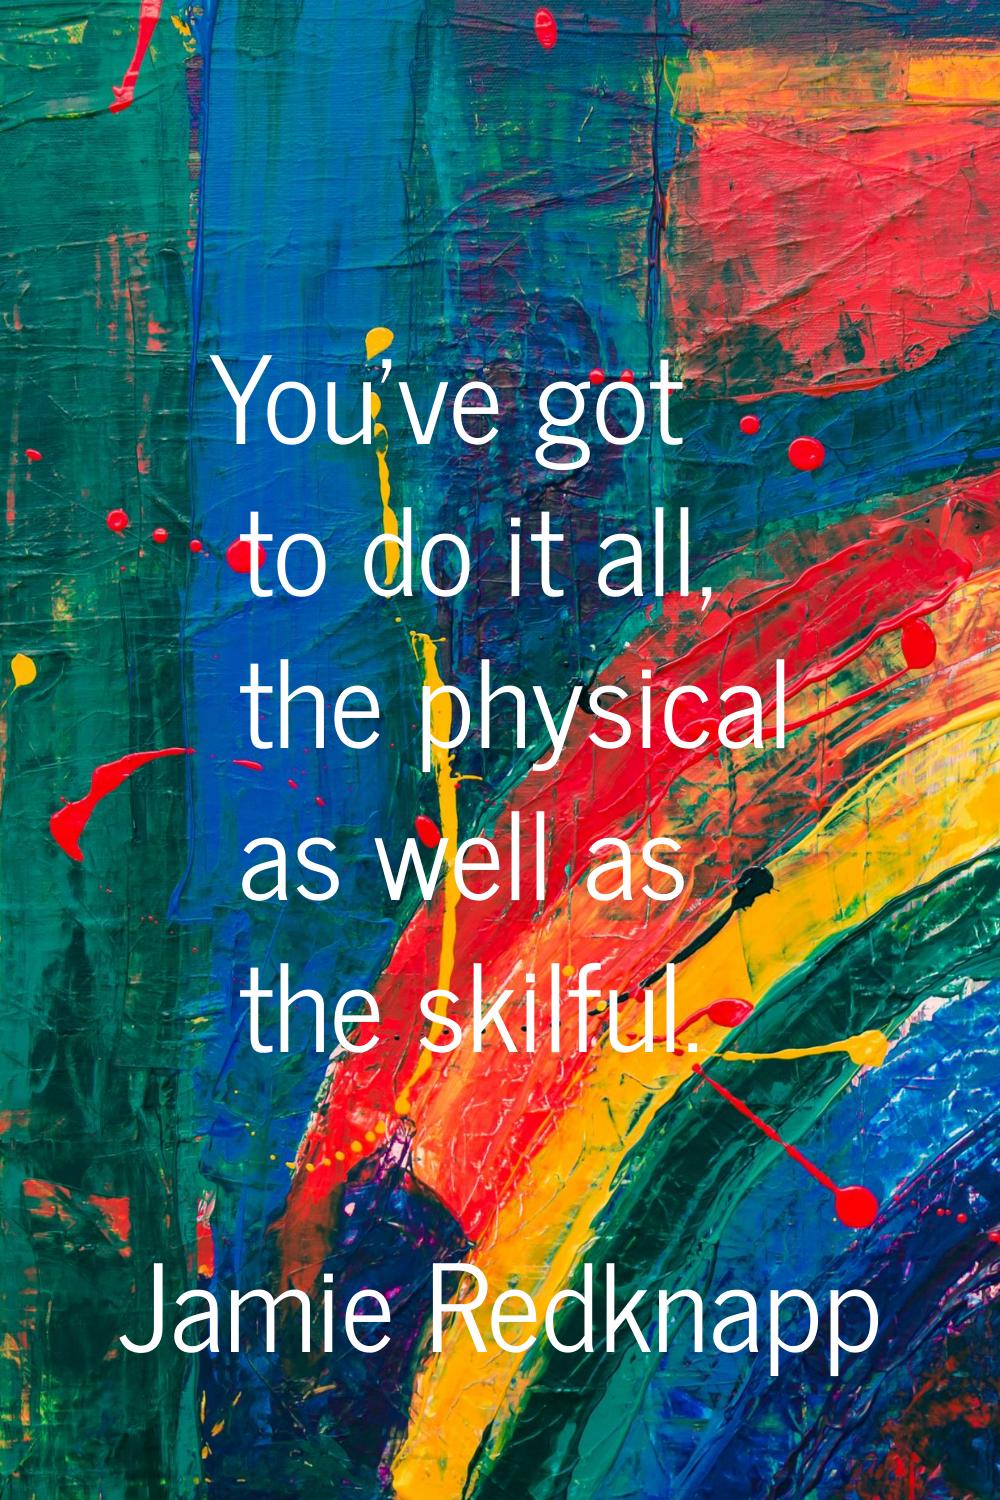 You've got to do it all, the physical as well as the skilful.